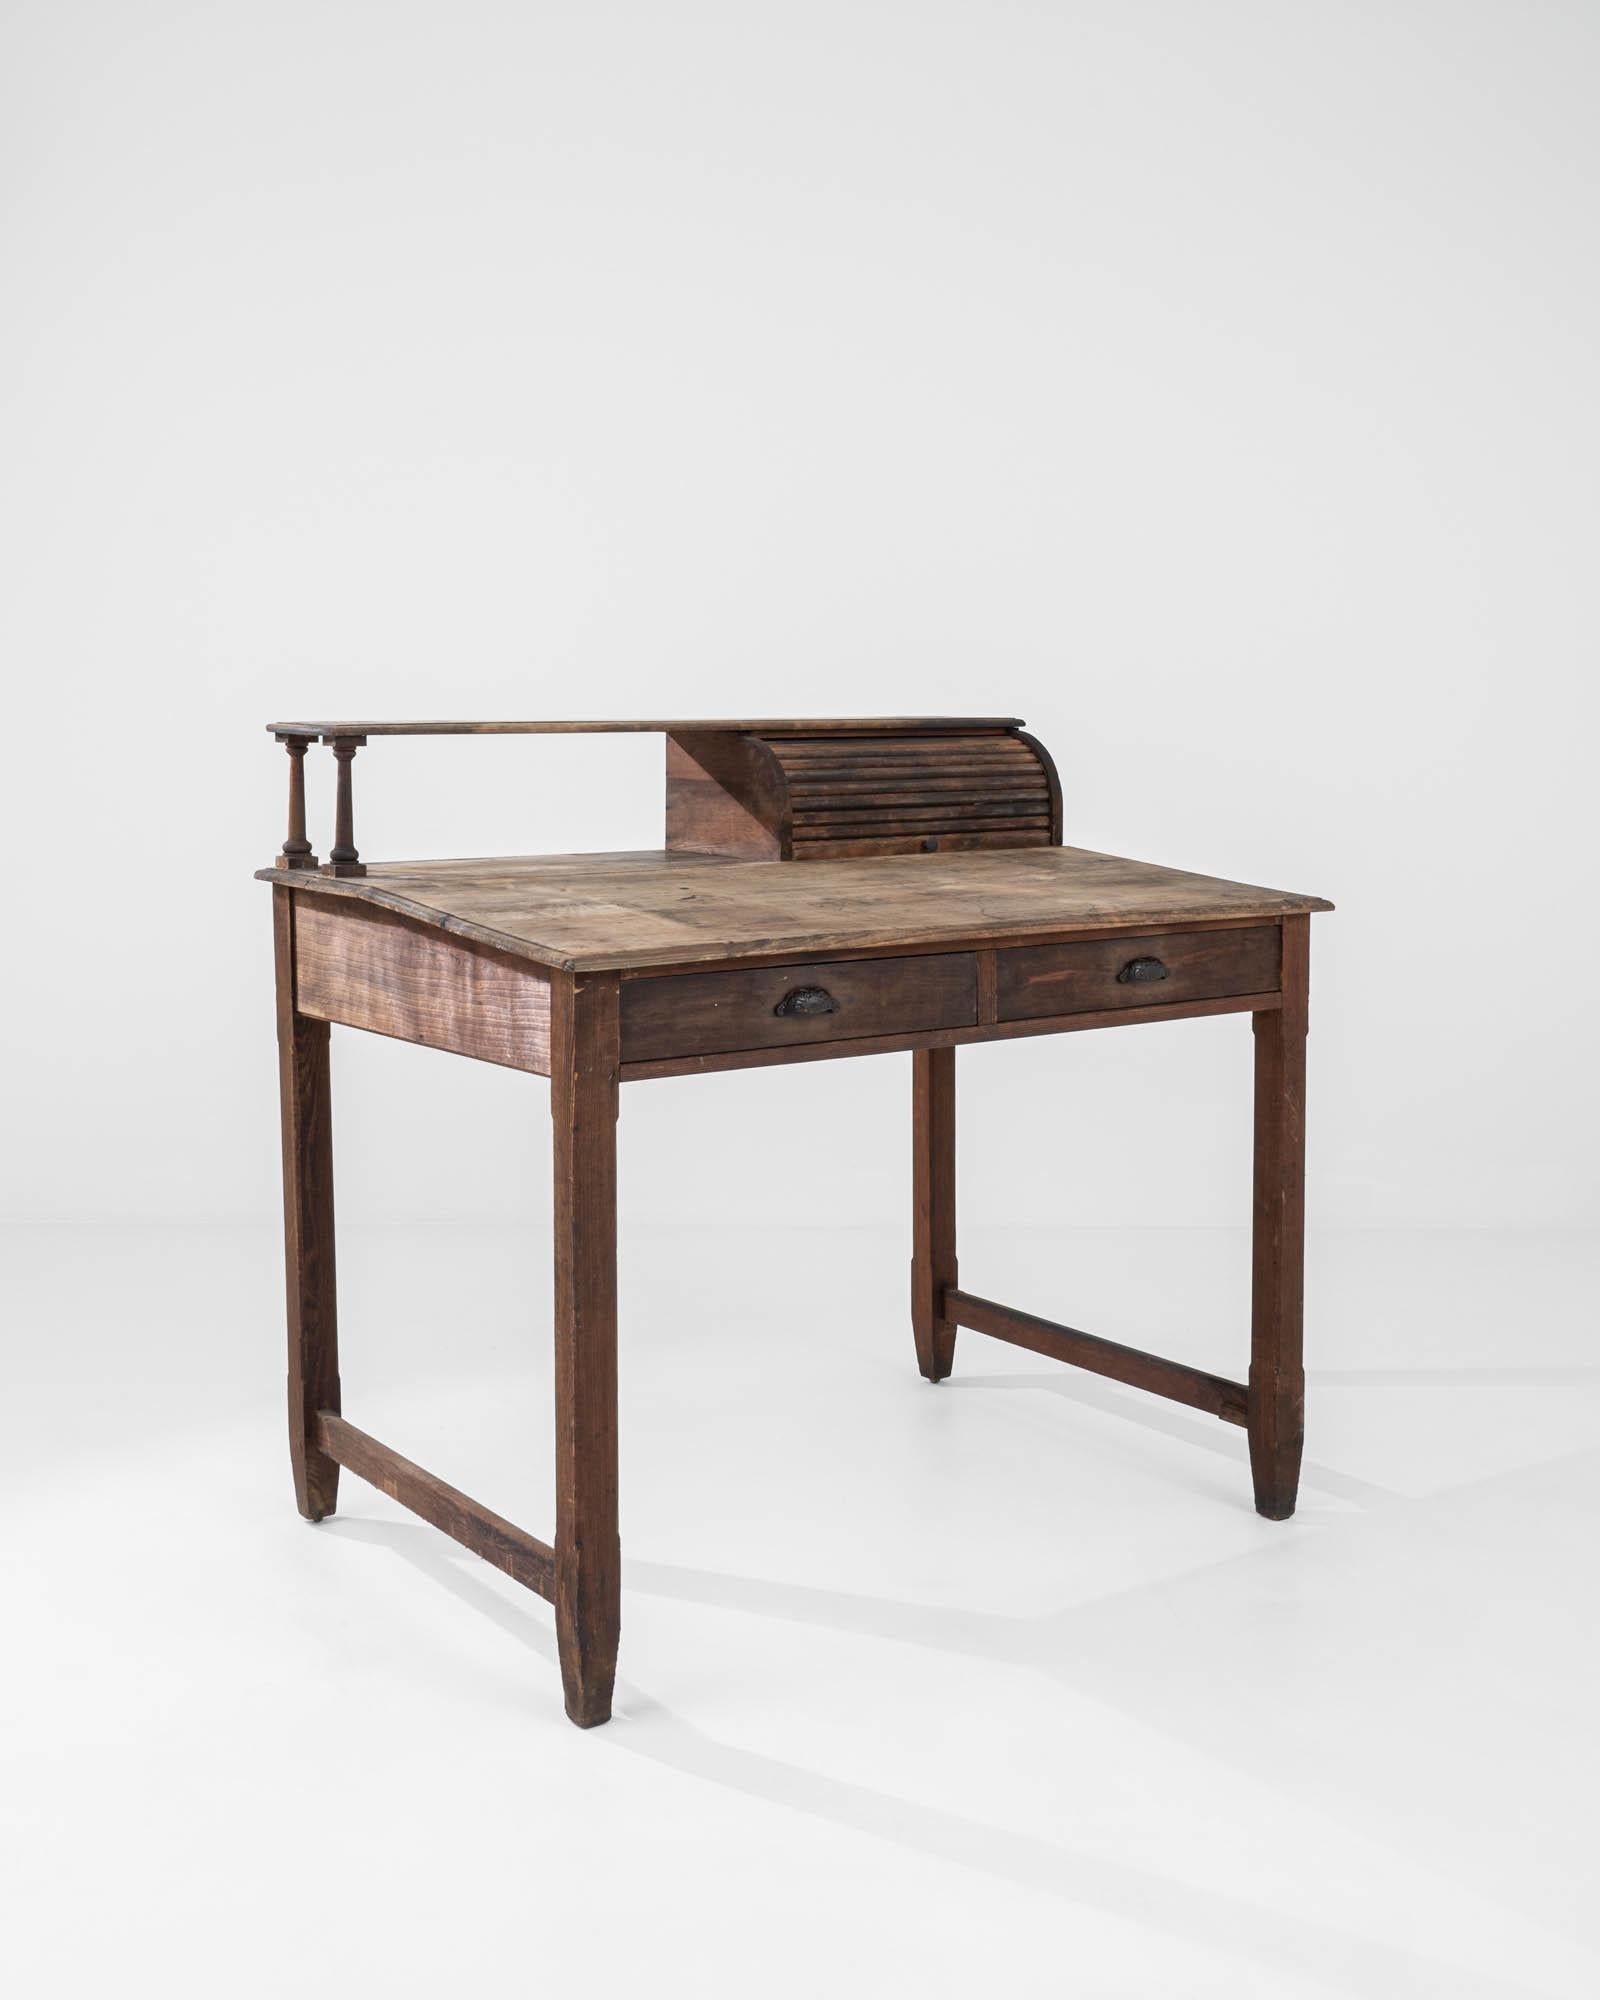 Early 20th Century Turn of the Century French Wooden Desk